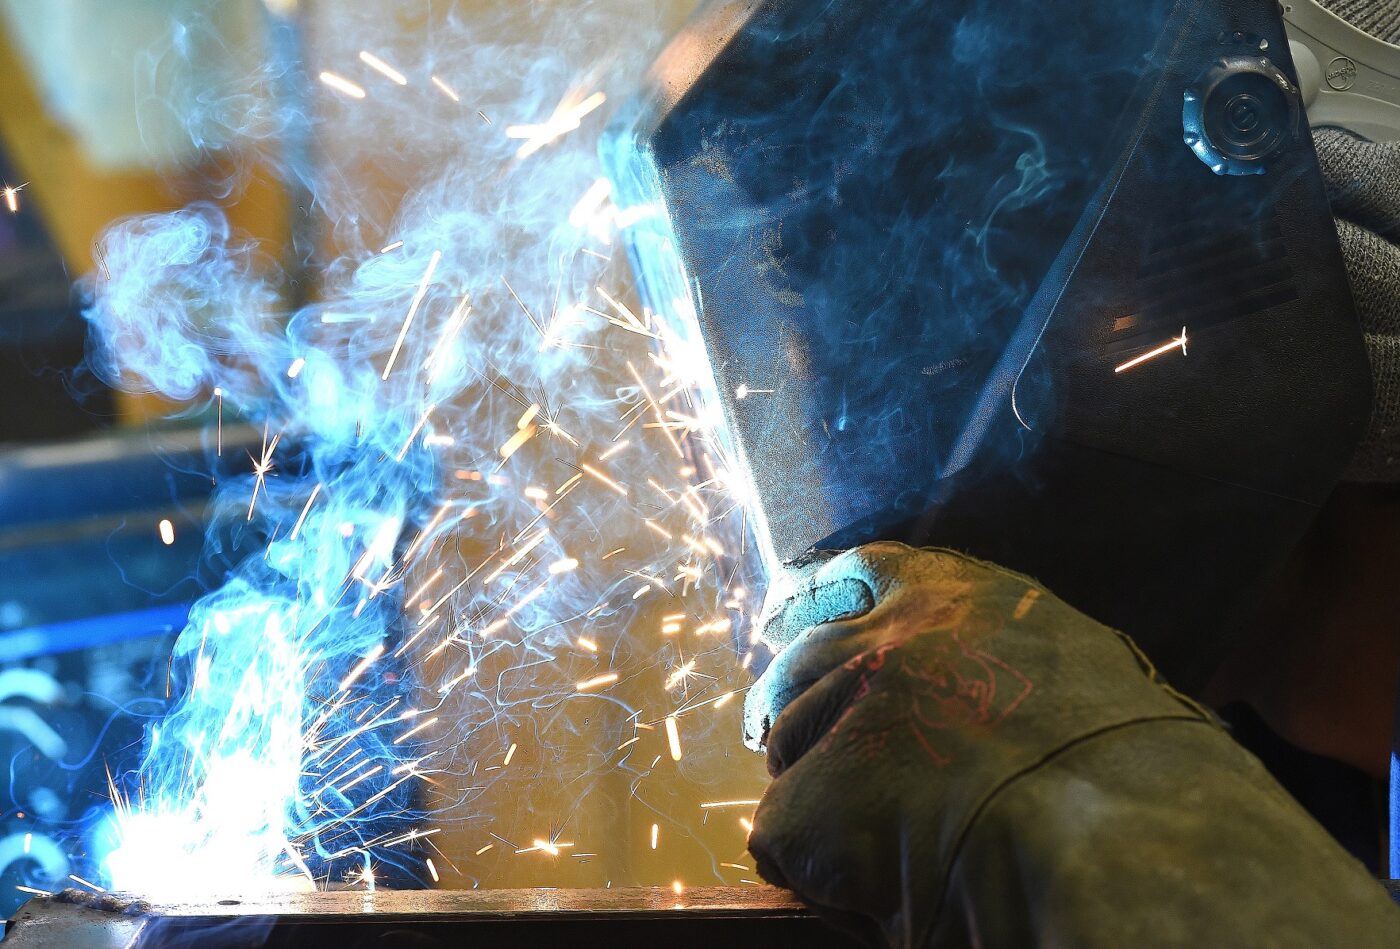 A close-up photo of a person wearing protective helmet and gloves welding metal.